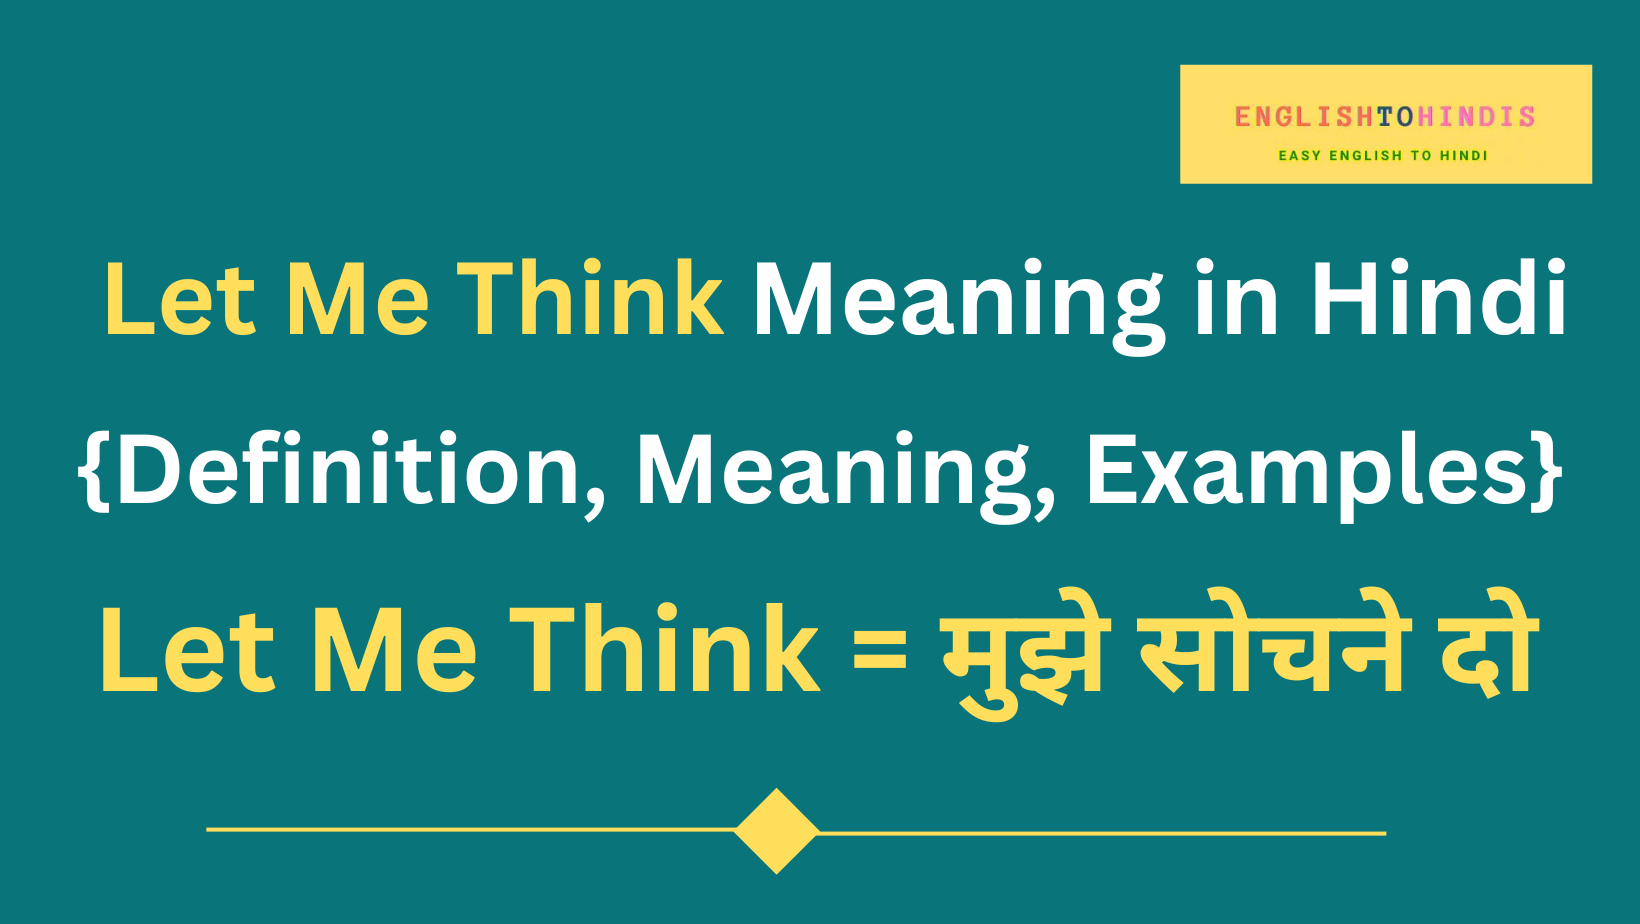 Let Me Think Meaning in Hindi